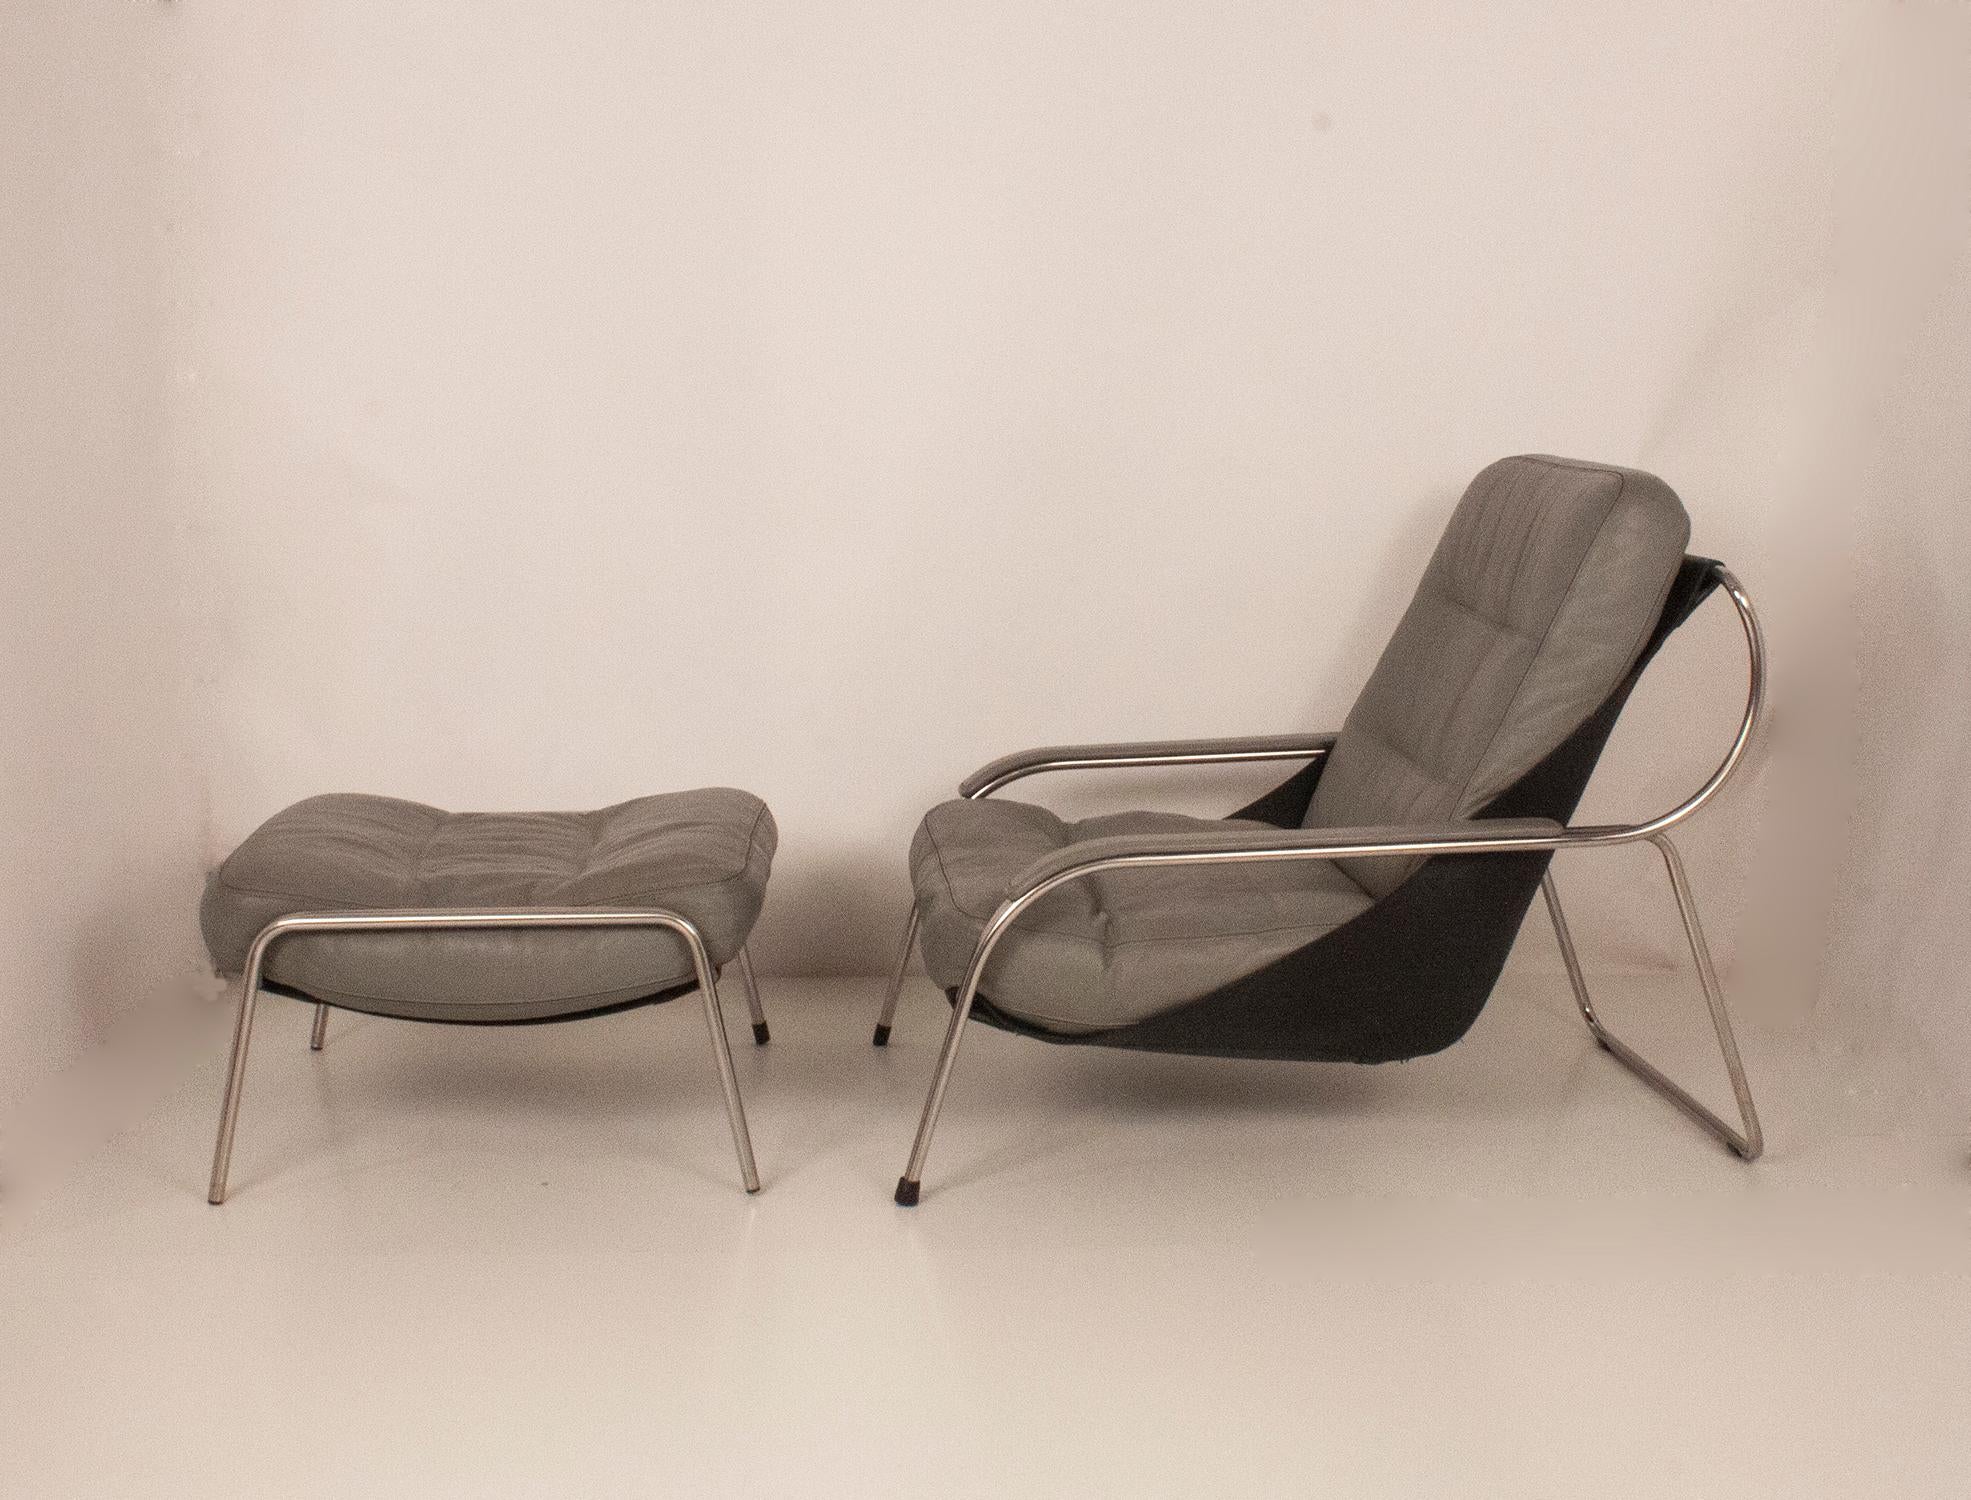 Maggiolina chair and ottoman by Zanotta designed by Marco Zanuso, 1947. Cowhide sling supports leather cushions. Stainless steel frame supports this very comfortable and sleek lounger! Ottoman. Color Gray